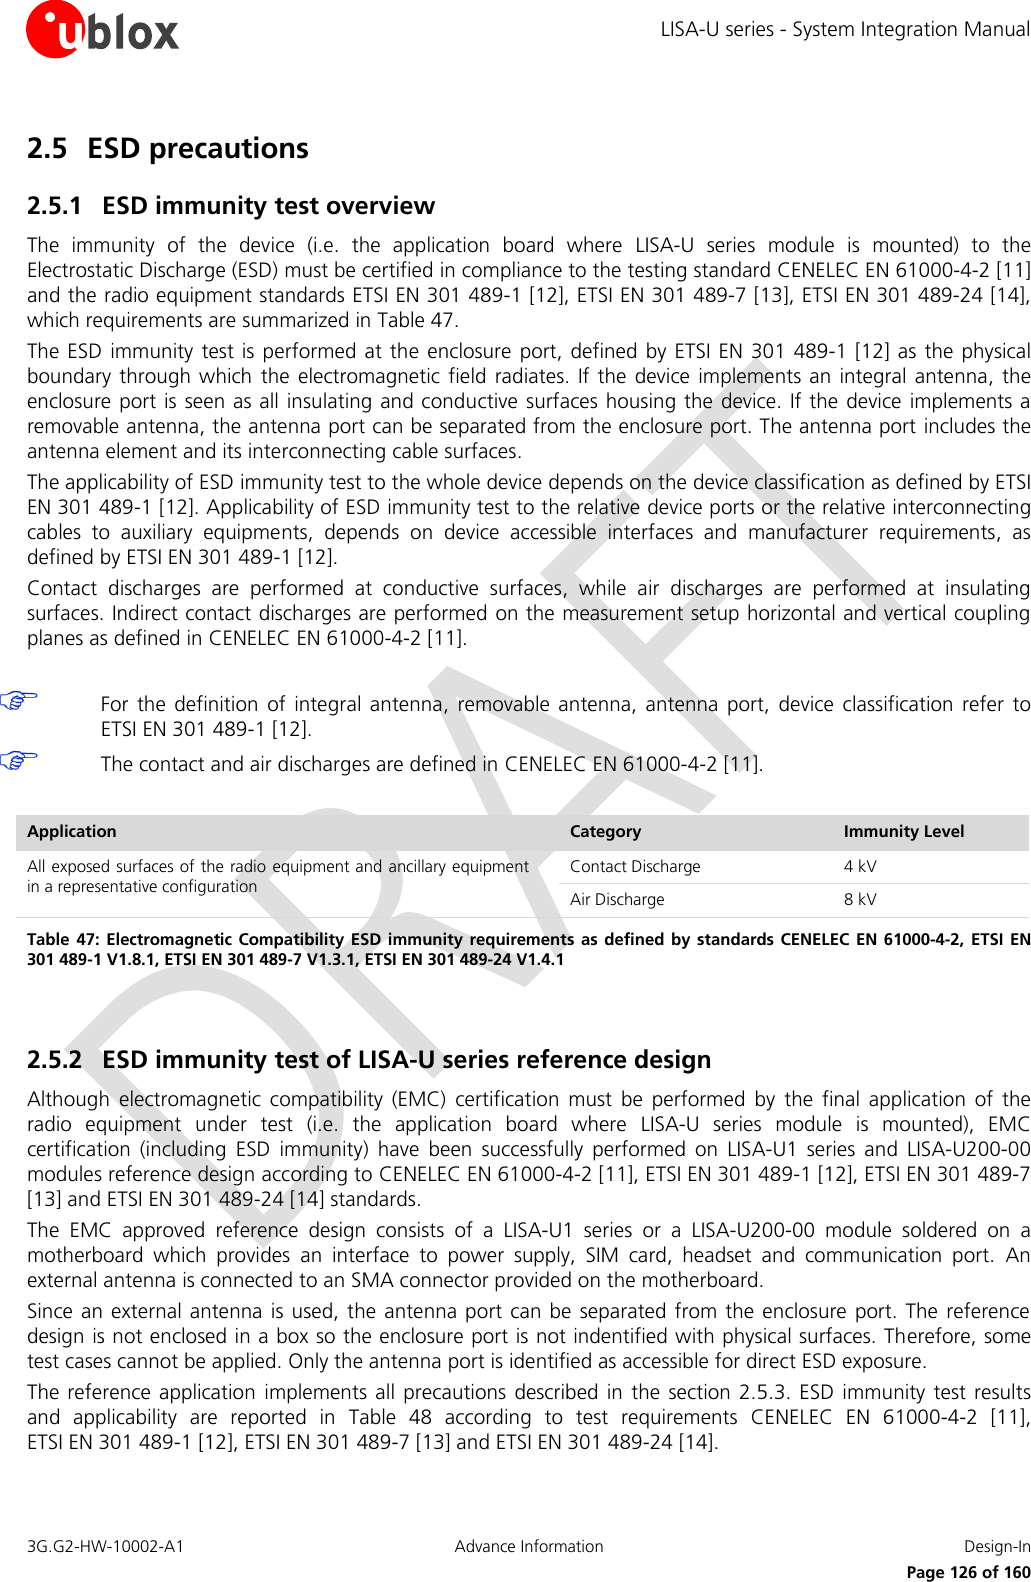 LISA-U series - System Integration Manual 3G.G2-HW-10002-A1  Advance Information  Design-In      Page 126 of 160 2.5 ESD precautions  2.5.1 ESD immunity test overview The  immunity  of  the  device  (i.e.  the  application  board  where  LISA-U  series  module  is  mounted)  to  the Electrostatic Discharge (ESD) must be certified in compliance to the testing standard CENELEC EN 61000-4-2 [11] and the radio equipment standards ETSI EN 301 489-1 [12], ETSI EN 301 489-7 [13], ETSI EN 301 489-24 [14], which requirements are summarized in Table 47. The ESD  immunity test is  performed  at the enclosure  port, defined by  ETSI EN 301 489-1 [12]  as the physical boundary through  which  the electromagnetic field radiates. If the device  implements an integral antenna, the enclosure port is seen as all insulating and conductive surfaces housing the device. If the device implements a removable antenna, the antenna port can be separated from the enclosure port. The antenna port includes the antenna element and its interconnecting cable surfaces. The applicability of ESD immunity test to the whole device depends on the device classification as defined by ETSI EN 301 489-1 [12]. Applicability of ESD immunity test to the relative device ports or the relative interconnecting cables  to  auxiliary  equipments,  depends  on  device  accessible  interfaces  and  manufacturer  requirements,  as defined by ETSI EN 301 489-1 [12]. Contact  discharges  are  performed  at  conductive  surfaces,  while  air  discharges  are  performed  at  insulating surfaces. Indirect contact discharges are performed on the measurement setup horizontal and vertical coupling planes as defined in CENELEC EN 61000-4-2 [11].   For  the definition  of  integral  antenna,  removable  antenna,  antenna  port,  device  classification  refer  to ETSI EN 301 489-1 [12].  The contact and air discharges are defined in CENELEC EN 61000-4-2 [11].  Application Category Immunity Level All exposed surfaces of the radio equipment and ancillary equipment in a representative configuration Contact Discharge 4 kV Air Discharge 8 kV Table 47:  Electromagnetic Compatibility ESD immunity requirements  as  defined by standards CENELEC  EN  61000-4-2, ETSI EN 301 489-1 V1.8.1, ETSI EN 301 489-7 V1.3.1, ETSI EN 301 489-24 V1.4.1  2.5.2 ESD immunity test of LISA-U series reference design Although  electromagnetic  compatibility  (EMC)  certification  must  be  performed  by  the  final  application  of  the radio  equipment  under  test  (i.e.  the  application  board  where  LISA-U  series  module  is  mounted),  EMC certification  (including  ESD  immunity)  have  been  successfully  performed  on  LISA-U1  series  and  LISA-U200-00 modules reference design according to CENELEC EN 61000-4-2 [11], ETSI EN 301 489-1 [12], ETSI EN 301 489-7 [13] and ETSI EN 301 489-24 [14] standards. The  EMC  approved  reference  design  consists  of  a  LISA-U1  series  or  a  LISA-U200-00  module  soldered  on  a motherboard  which  provides  an  interface  to  power  supply,  SIM  card,  headset  and  communication  port.  An external antenna is connected to an SMA connector provided on the motherboard. Since an external antenna  is used, the antenna port  can be separated from the  enclosure  port.  The reference design is not enclosed in a box so the enclosure port is not indentified with physical surfaces. Therefore, some test cases cannot be applied. Only the antenna port is identified as accessible for direct ESD exposure. The reference application  implements all precautions described  in the  section 2.5.3. ESD immunity test  results and  applicability  are  reported  in  Table  48  according  to  test  requirements  CENELEC  EN  61000-4-2  [11],  ETSI EN 301 489-1 [12], ETSI EN 301 489-7 [13] and ETSI EN 301 489-24 [14].  